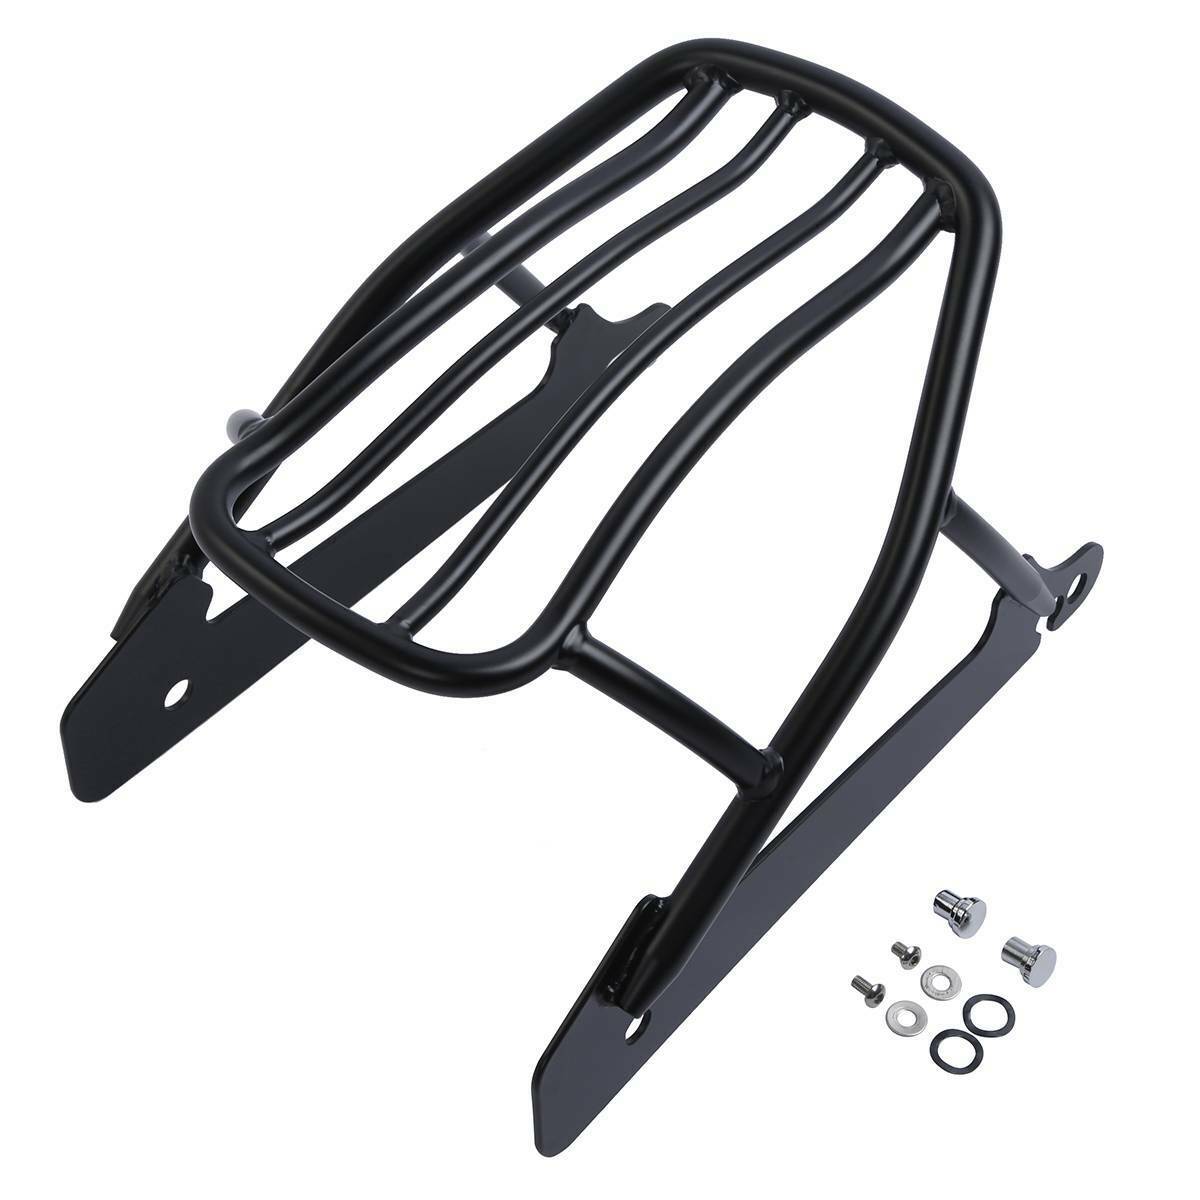 solo-luggage-rack-fit-for-harley-dyna-fat-street-bob-super-glide-06-17